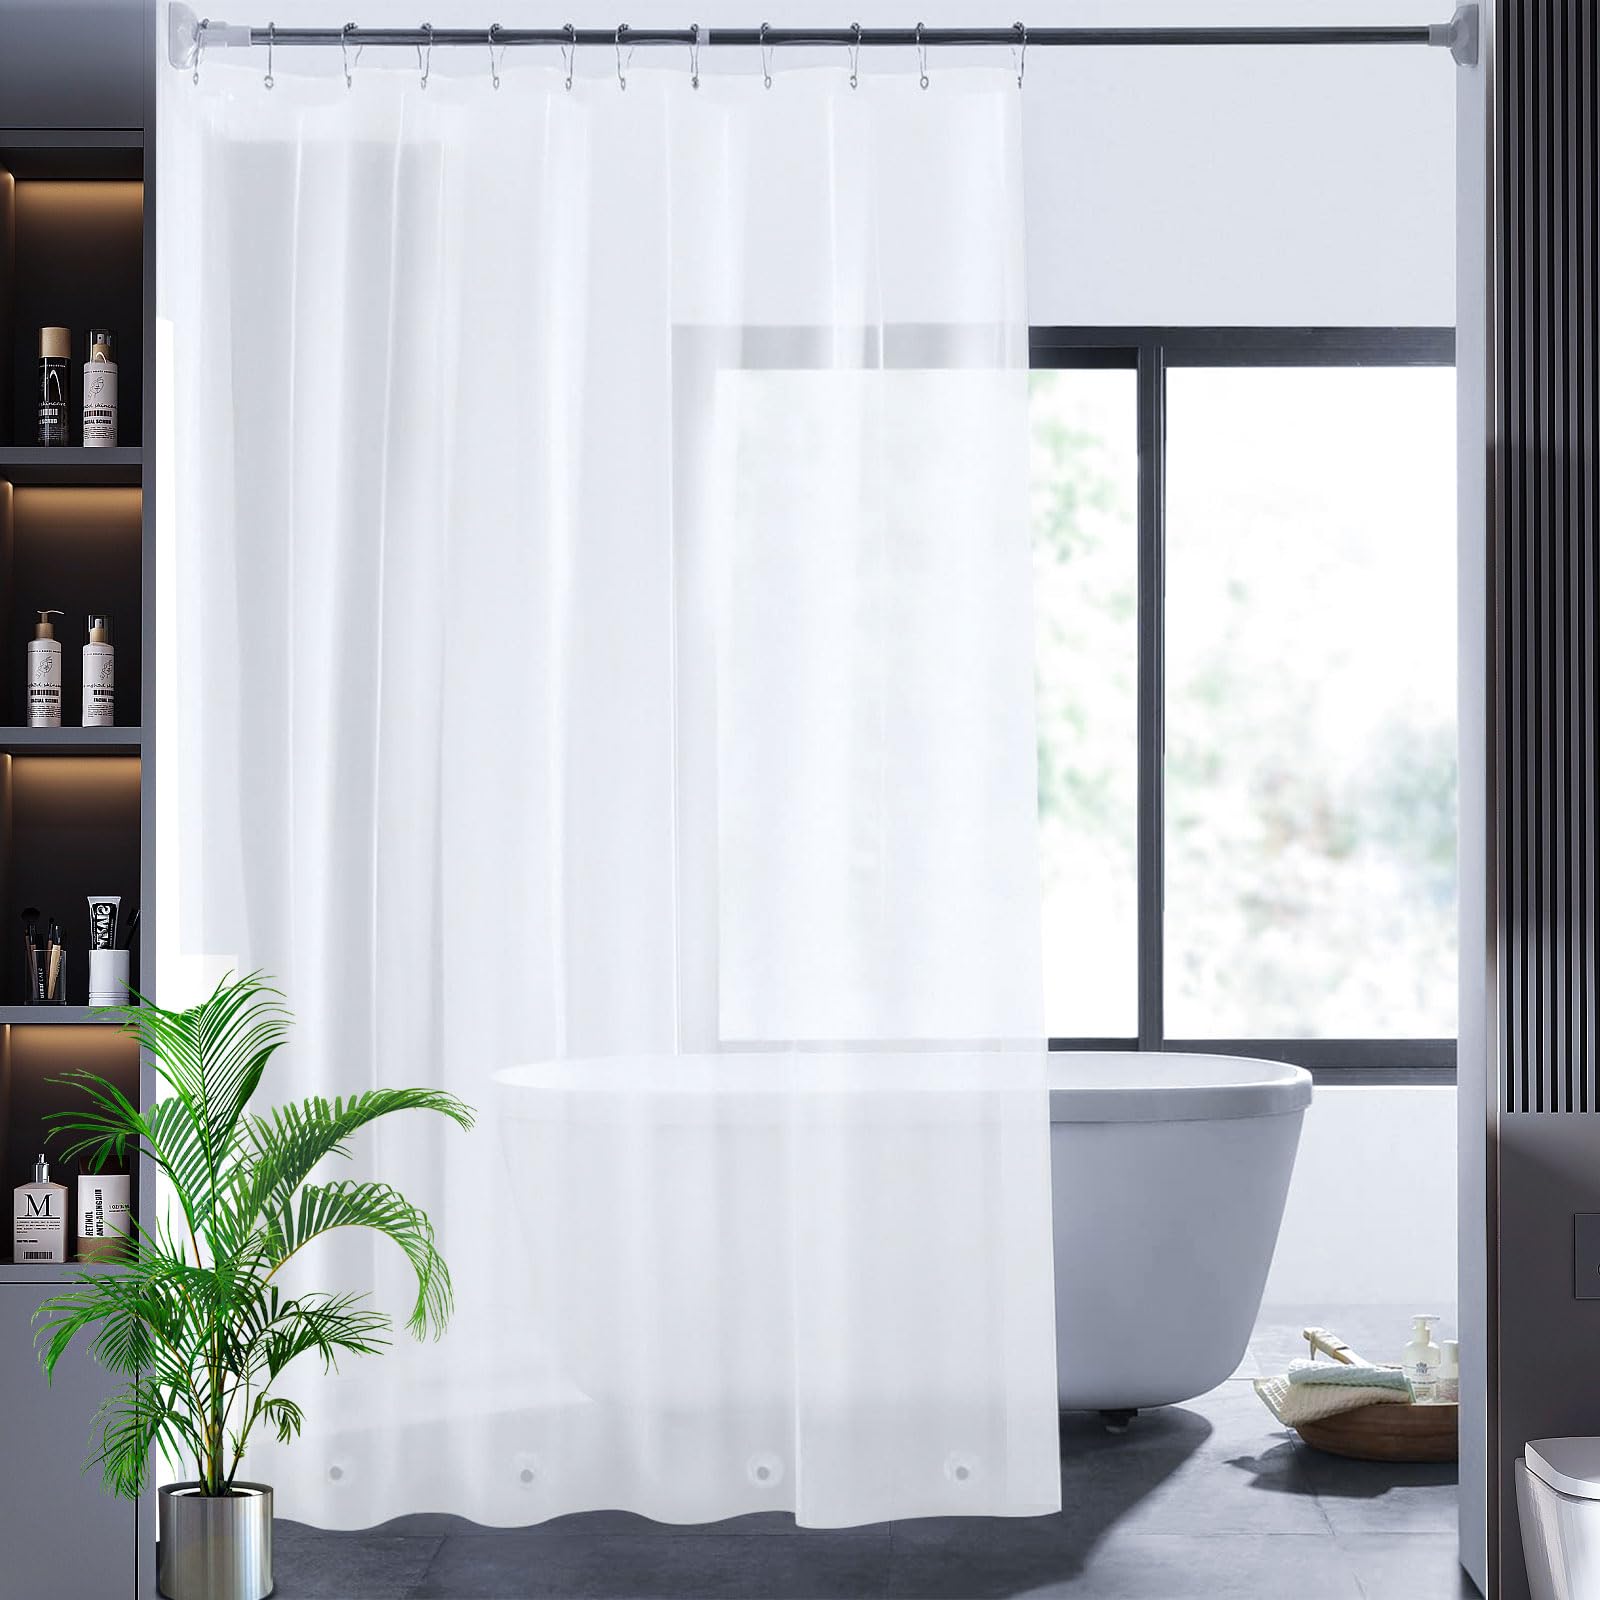 Frosted Shower Curtain Liner 76 Inches Long with 6 Side Magnets Closure & 3 Large Heavy Bottom Magnets, PEVA Opaque Lightweight Long Shower Curtain Liner 76 inch Length, No Smells (72" W x 76" L)